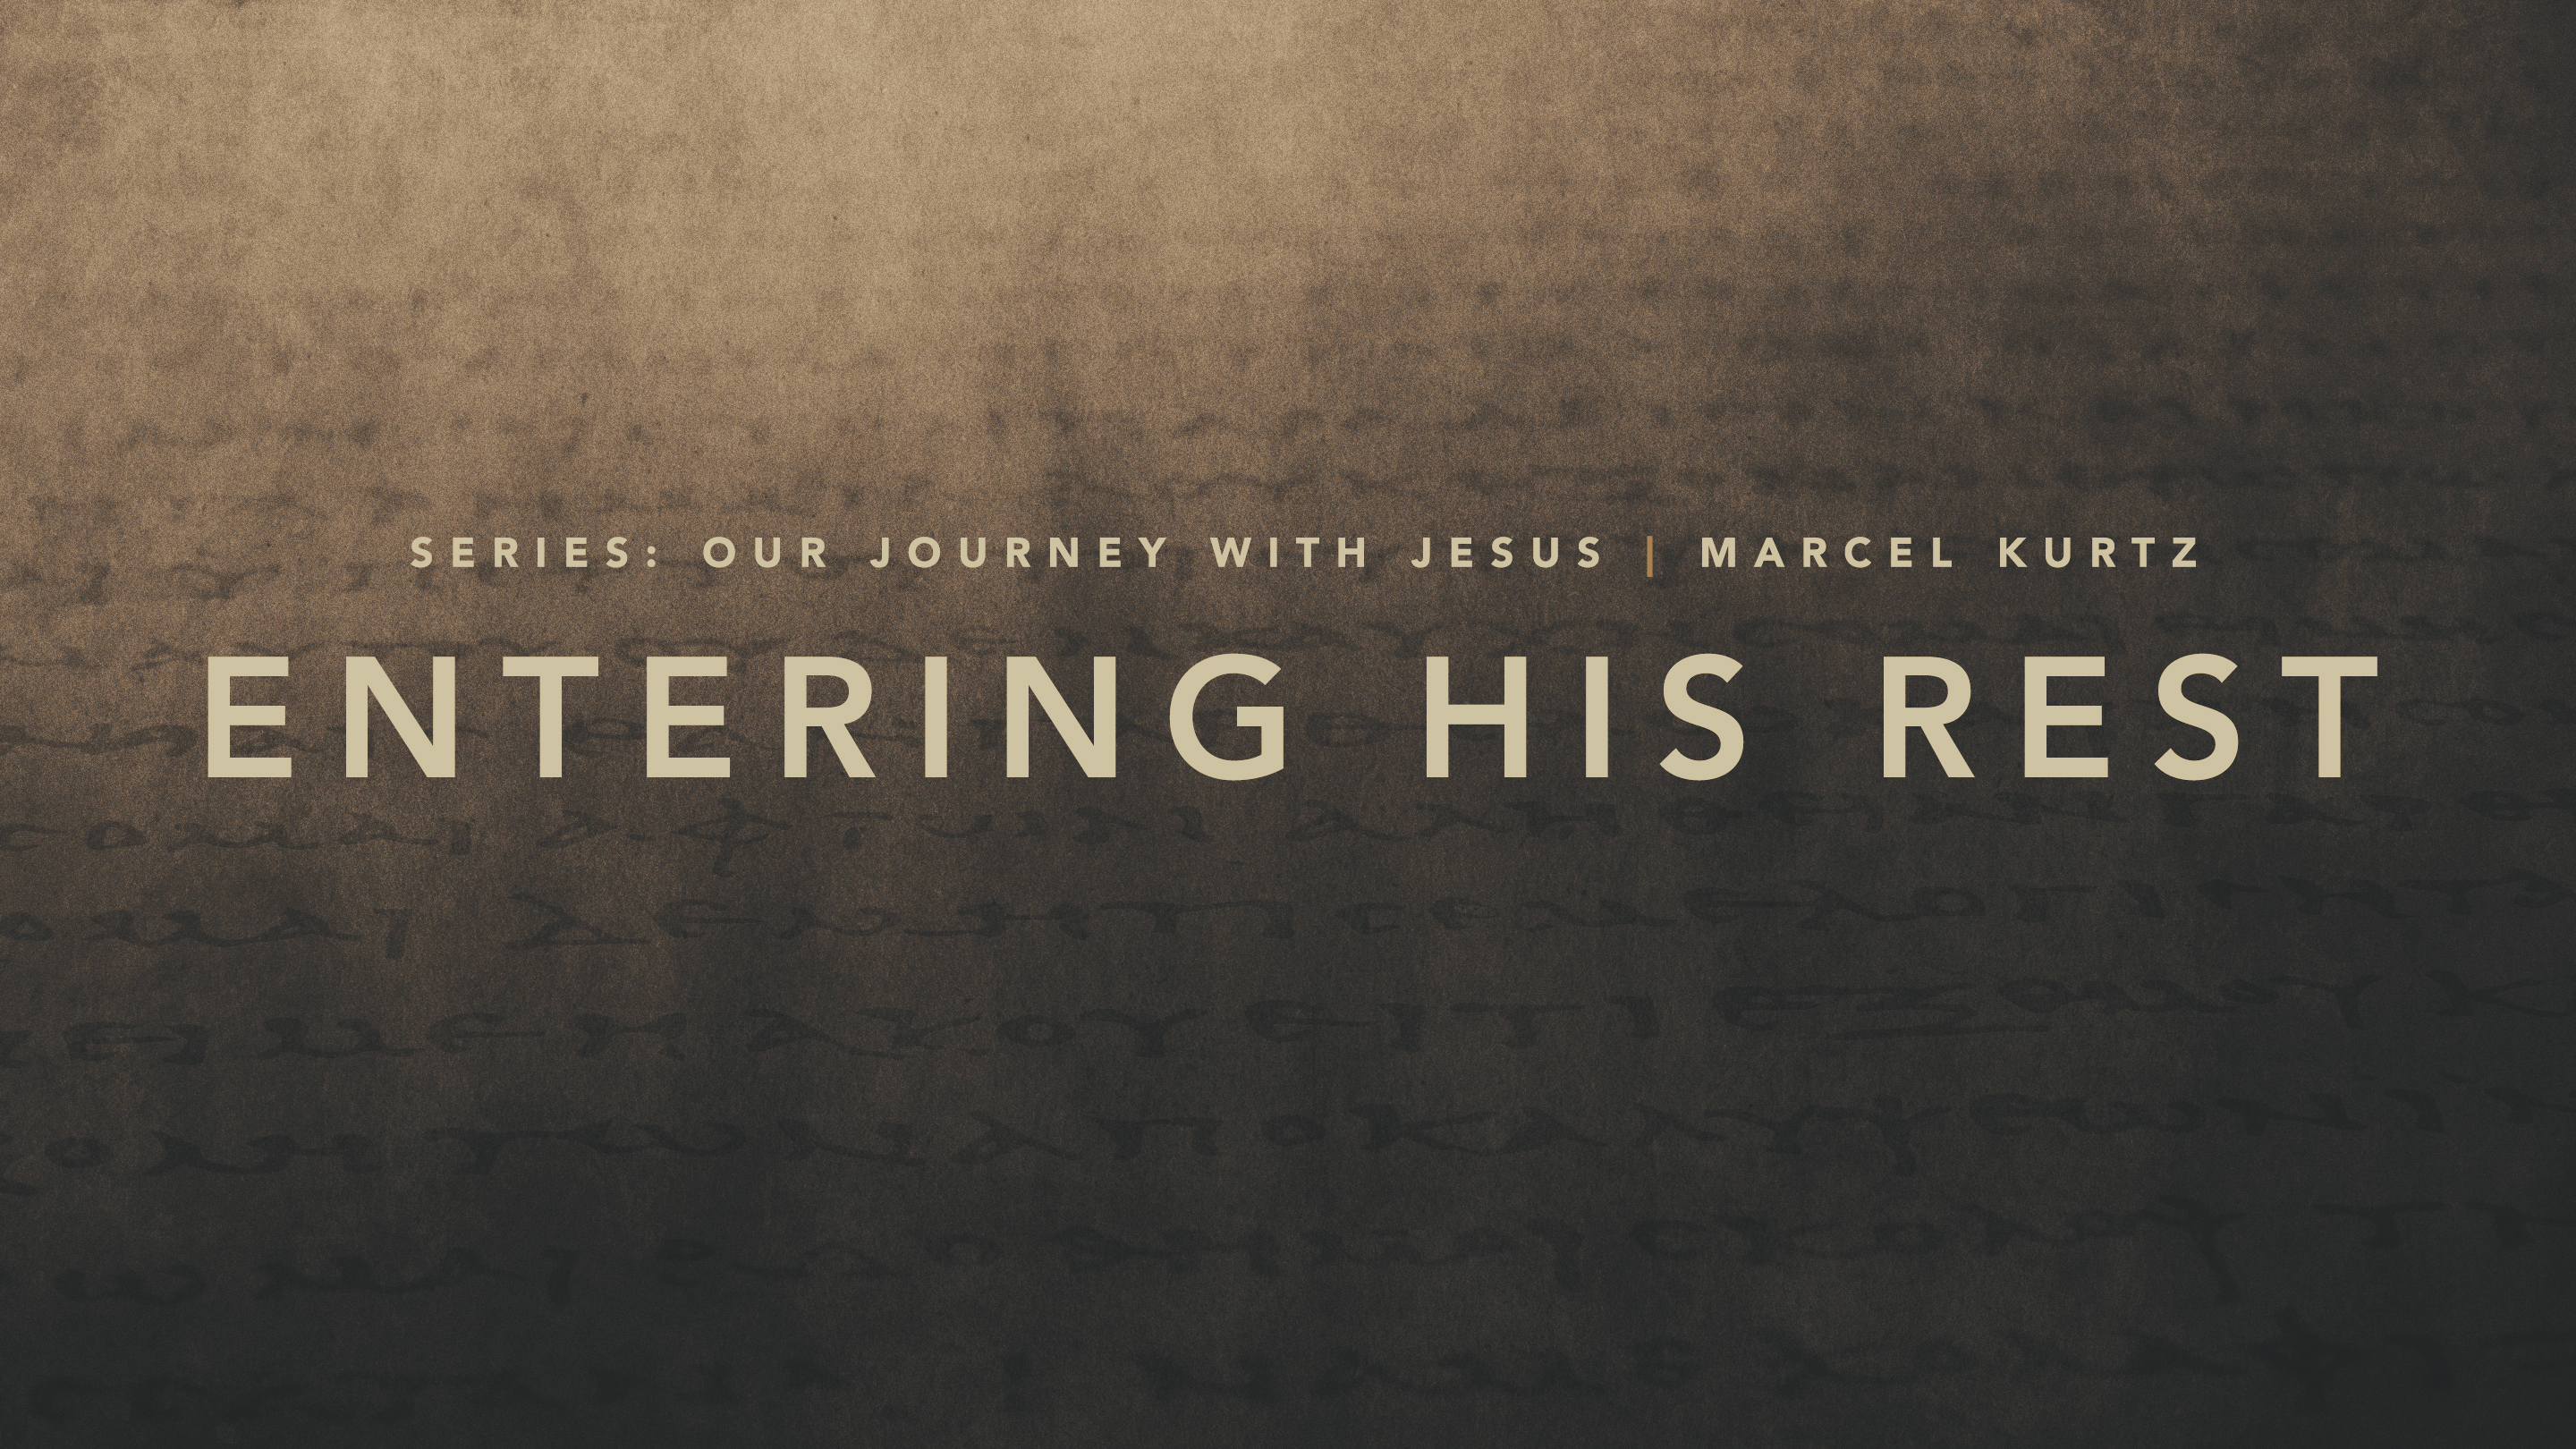 Our Journey with Jesus 02: Entering His Rest